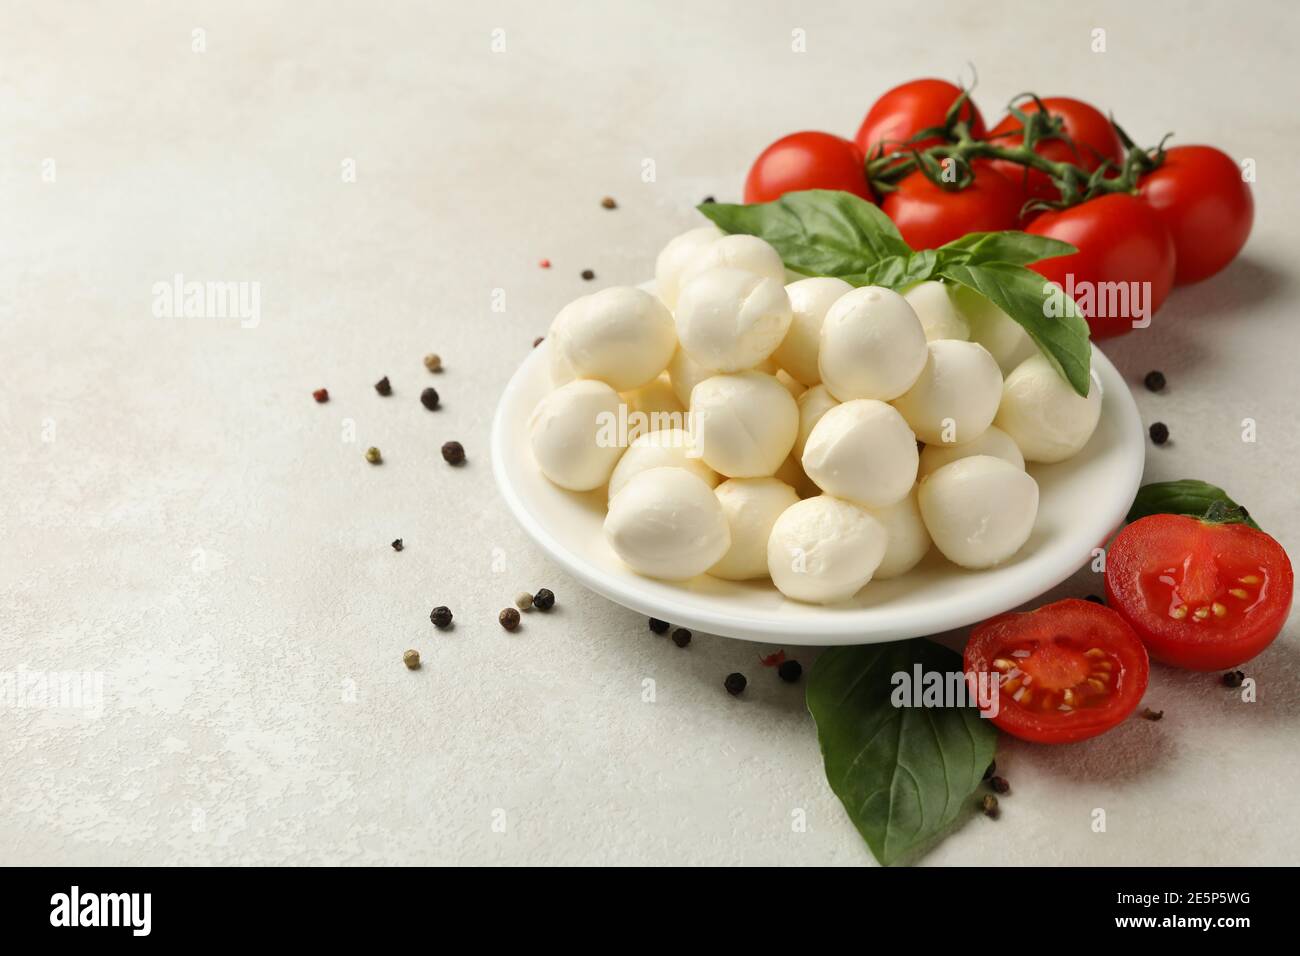 Plate with mozzarella and basil, tomato and pepper on white textured background, space for text Stock Photo